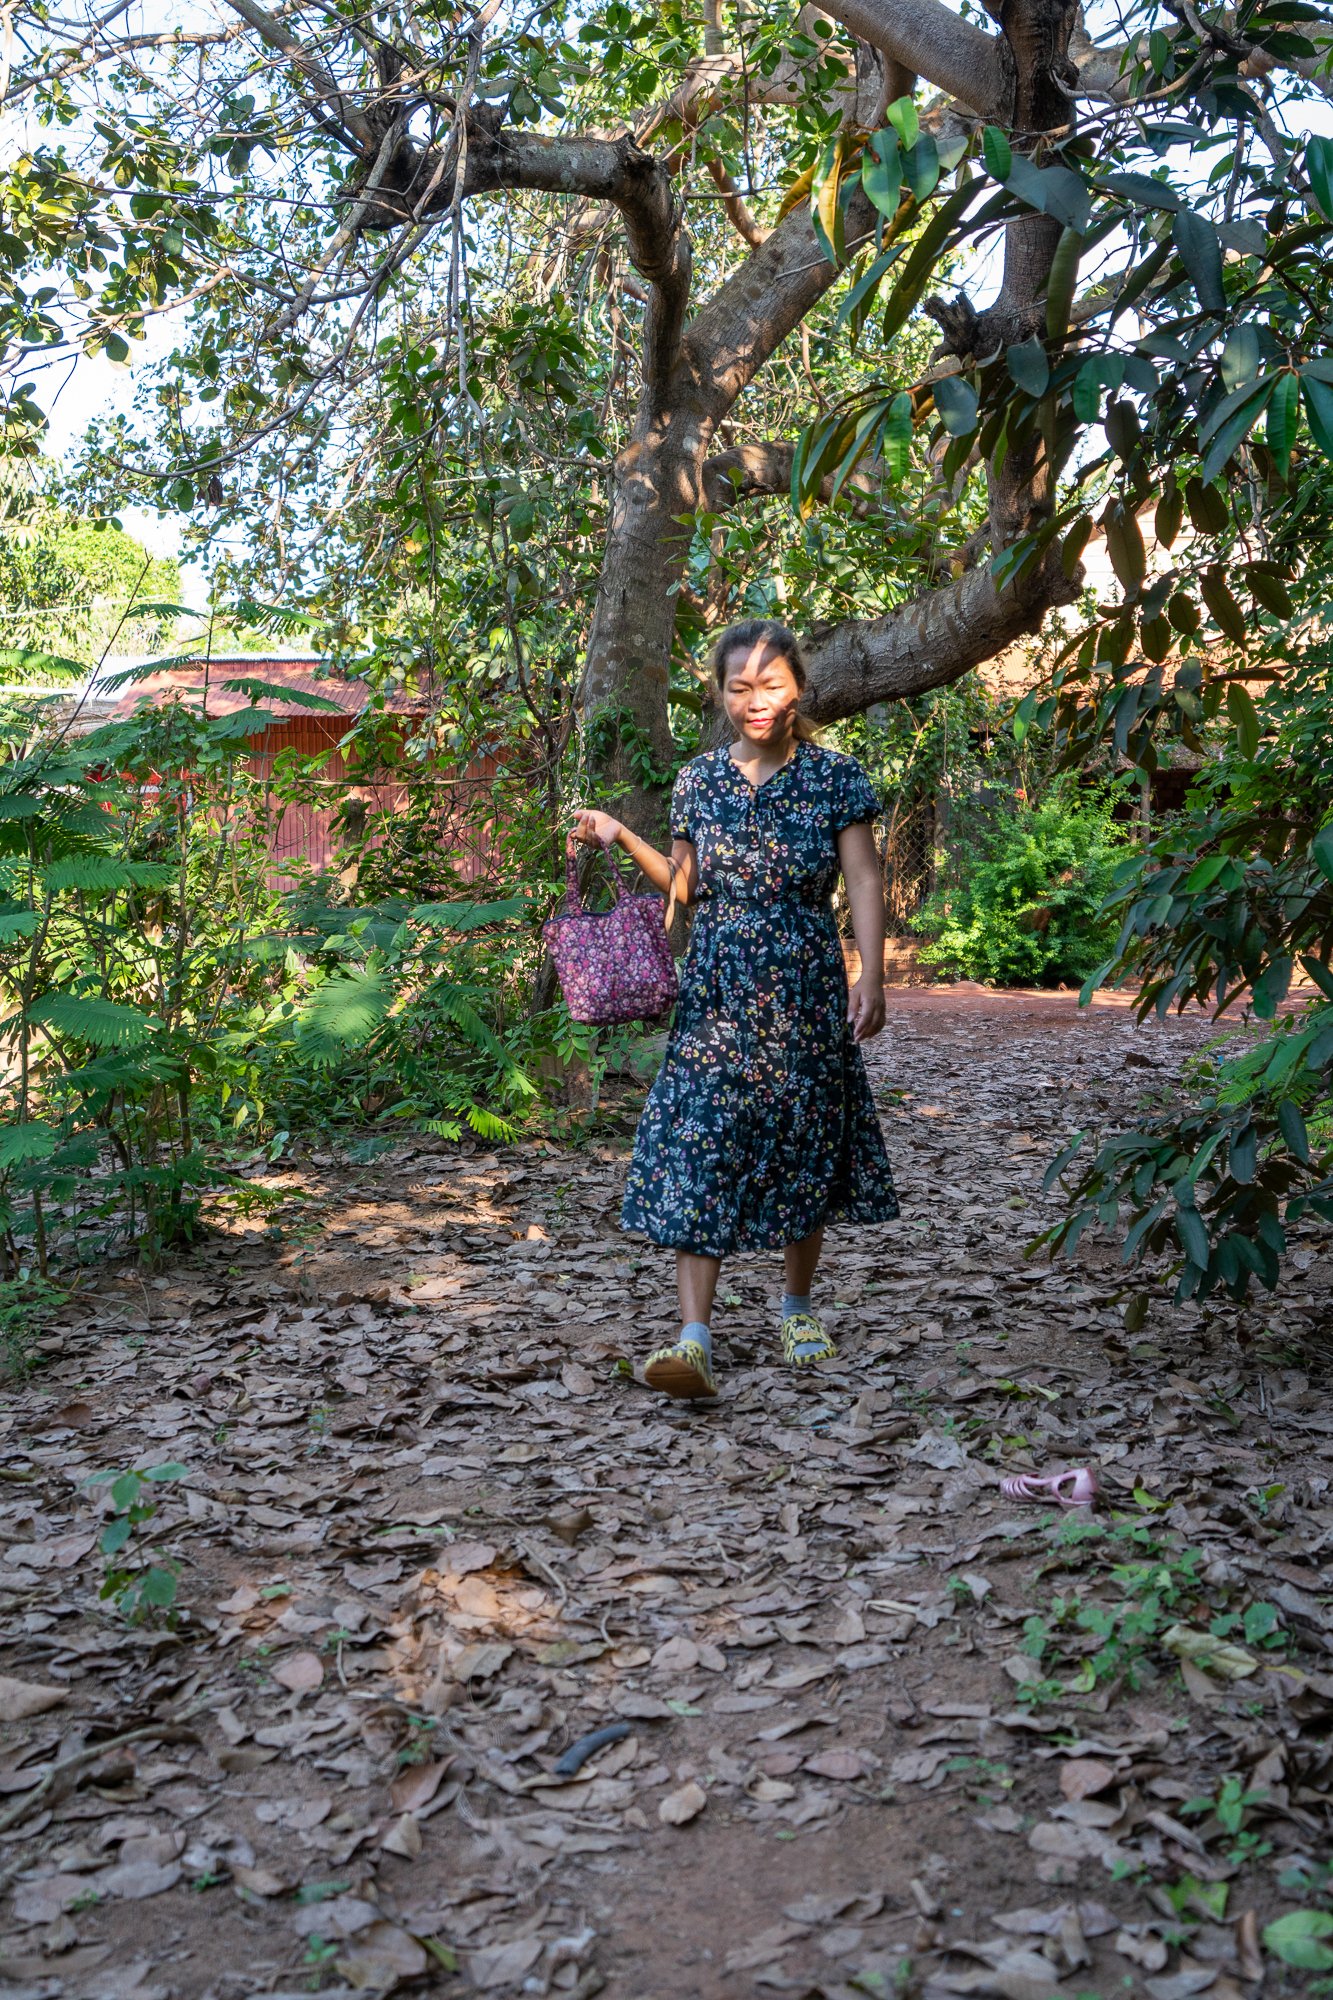 San Sotheary walks home from the market with produce to cook on her ACE stove